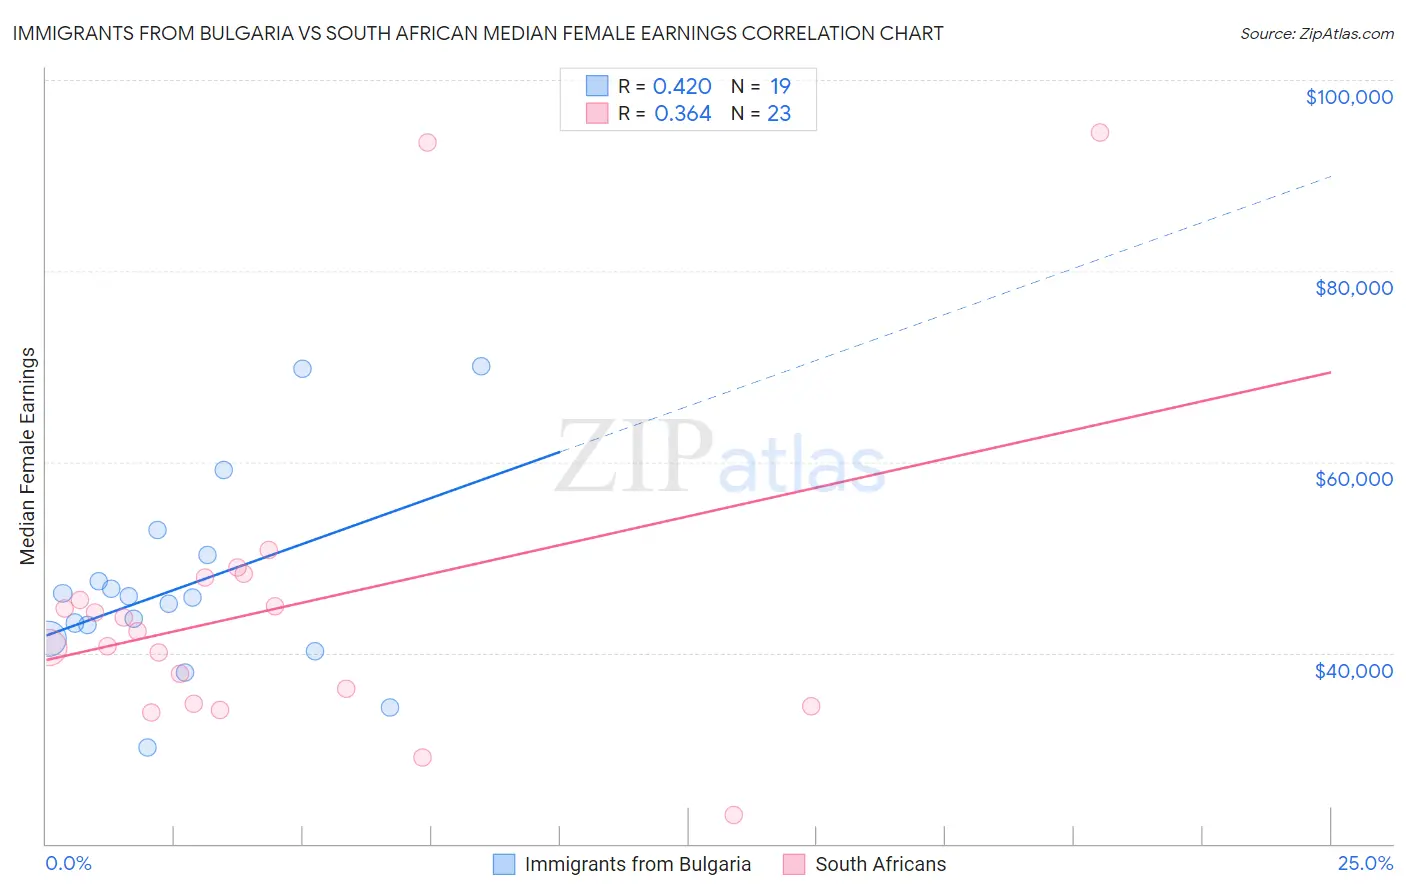 Immigrants from Bulgaria vs South African Median Female Earnings